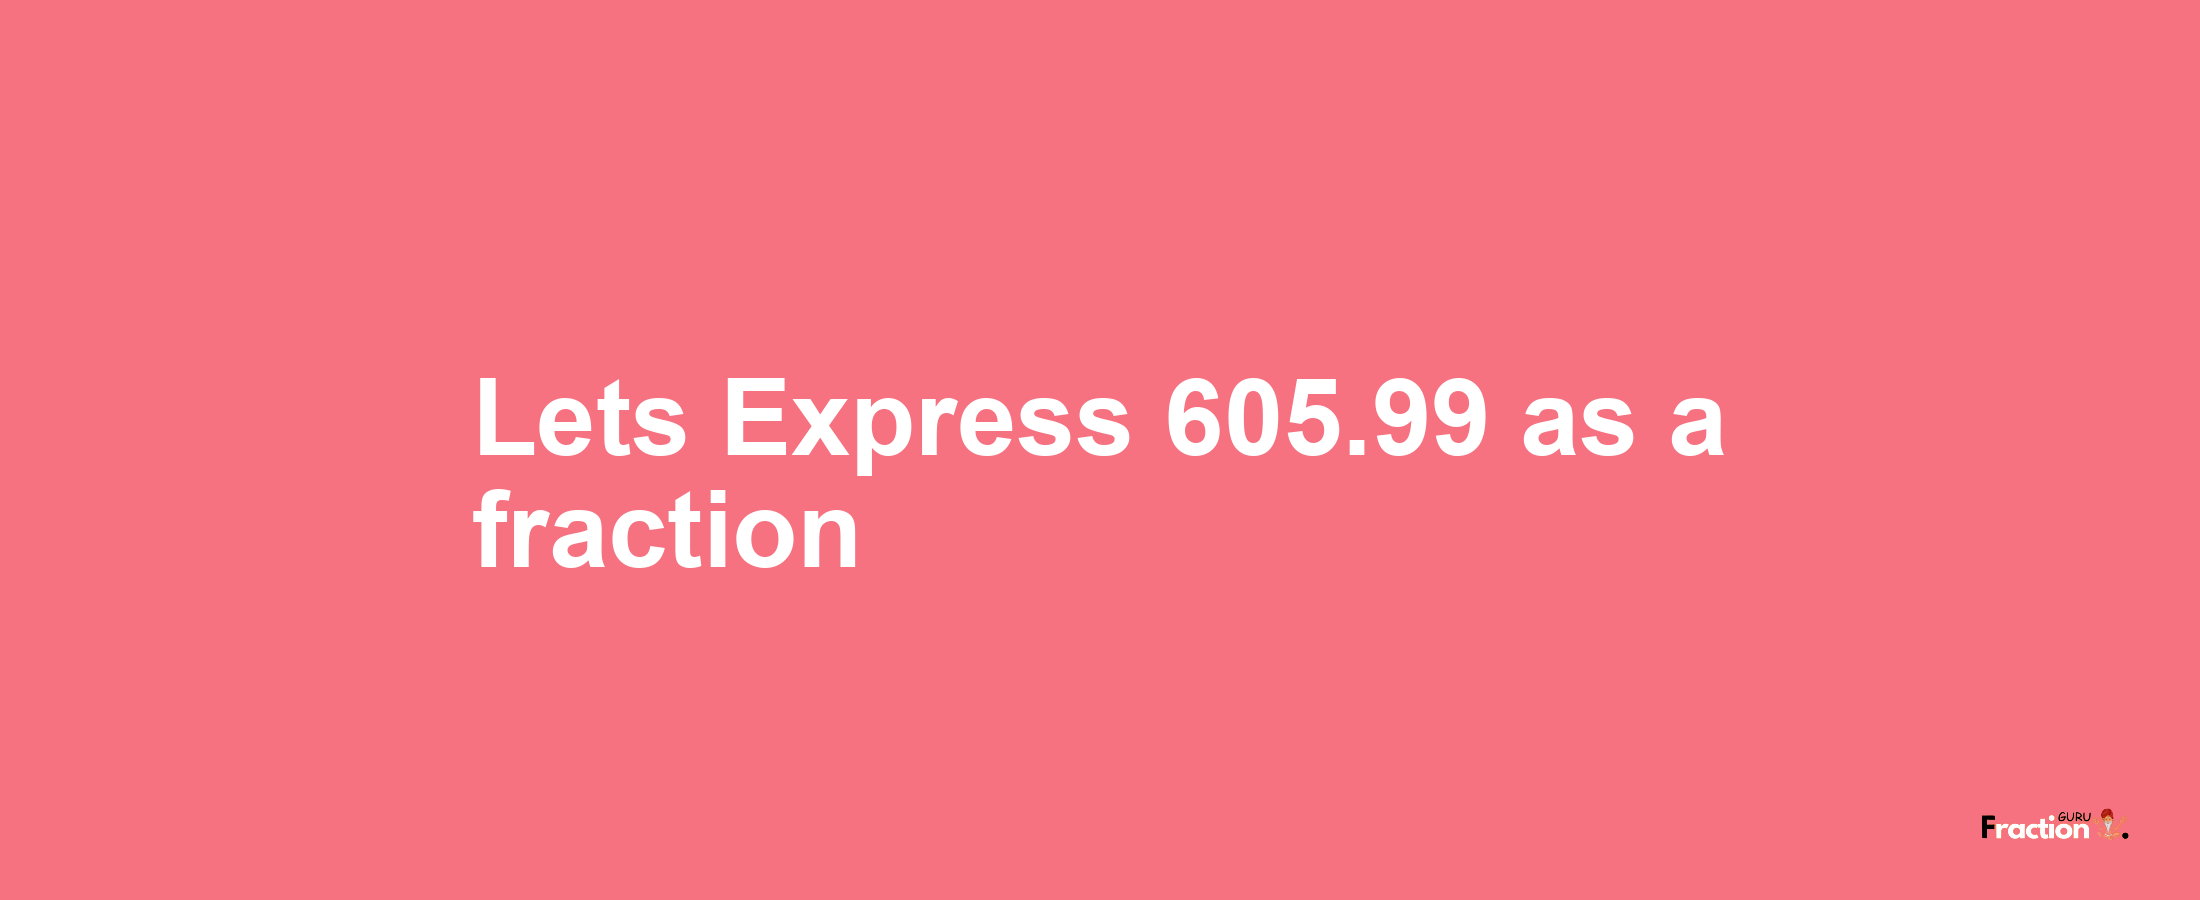 Lets Express 605.99 as afraction